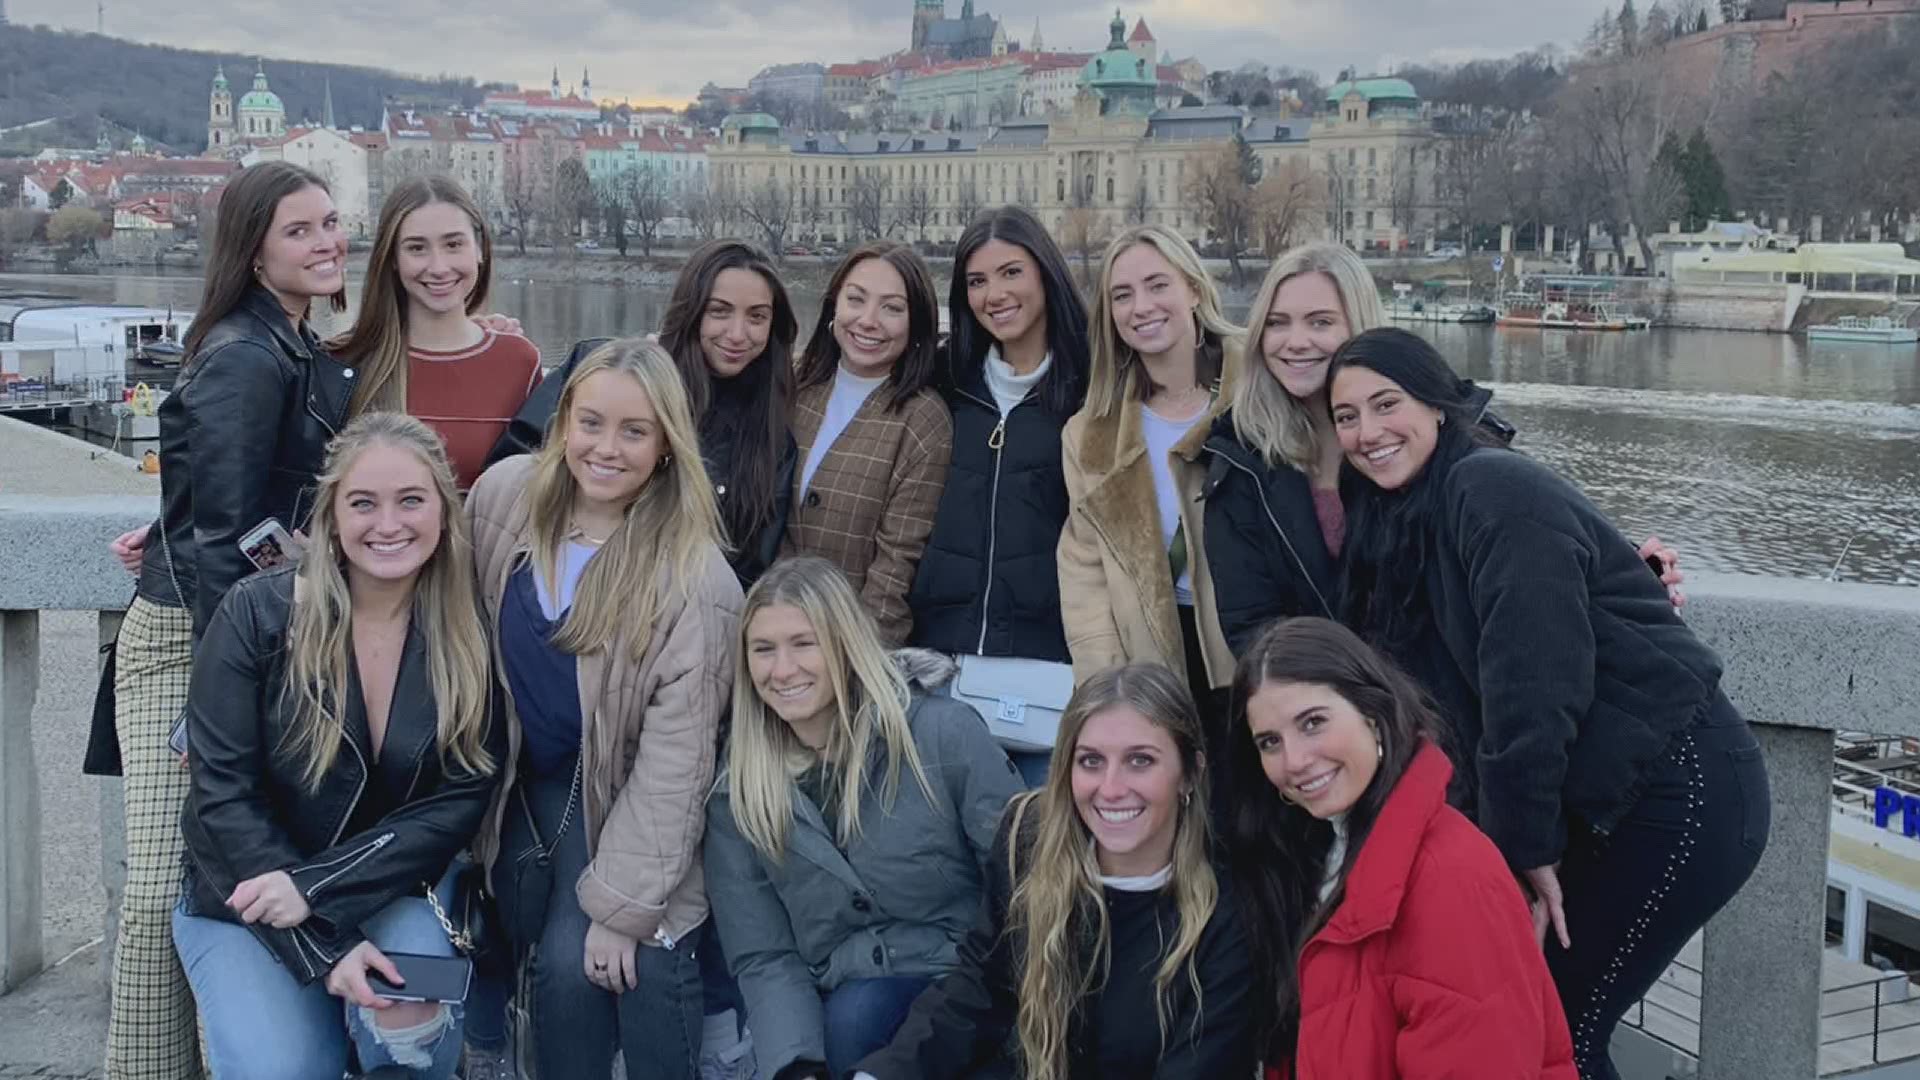 For students, studying abroad is often a once-in-a-lifetime opportunity.